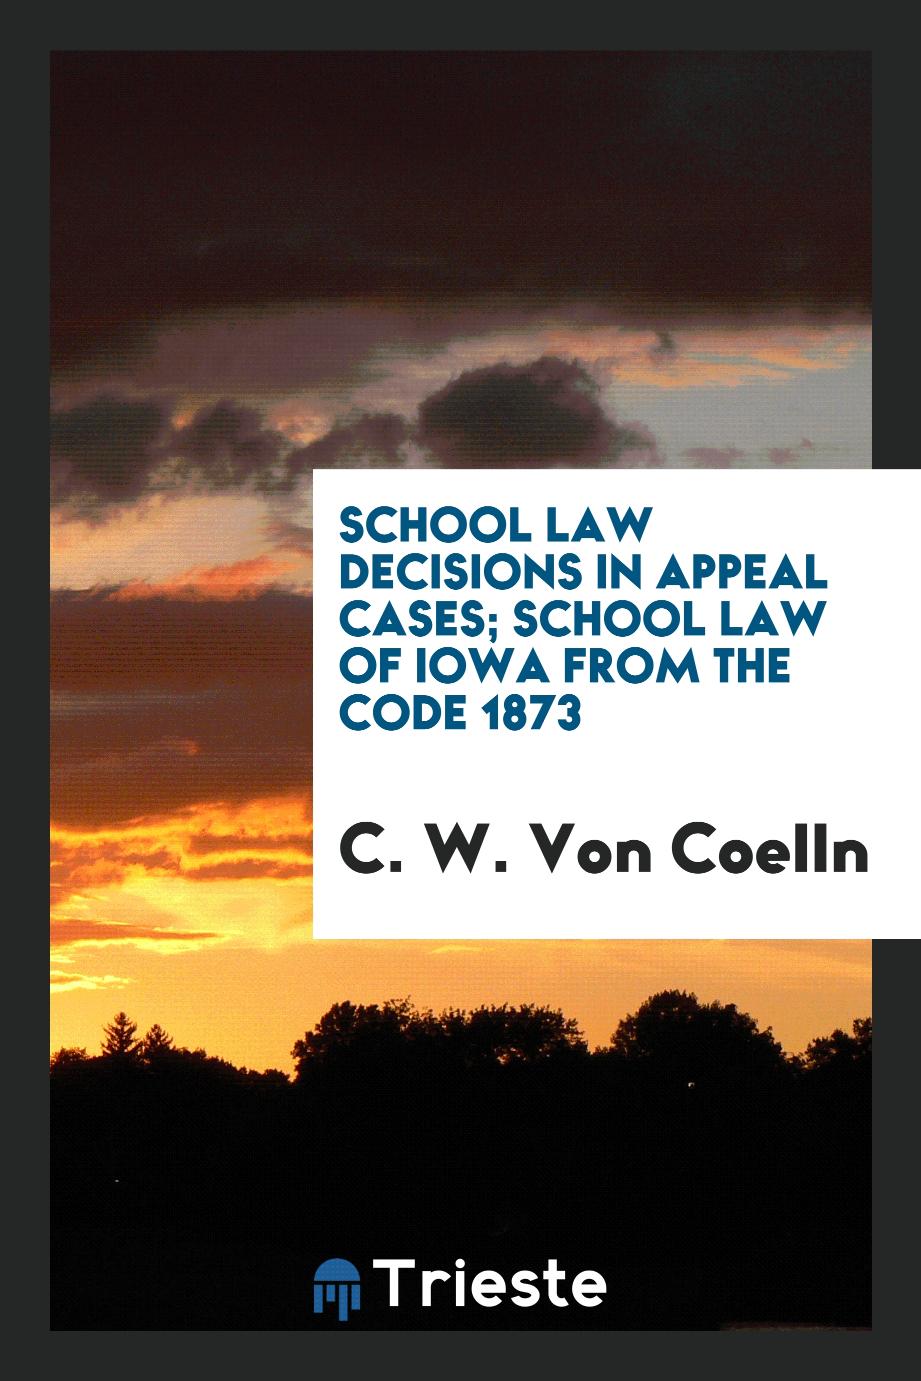 School law decisions in appeal cases; School law of Iowa from the code 1873